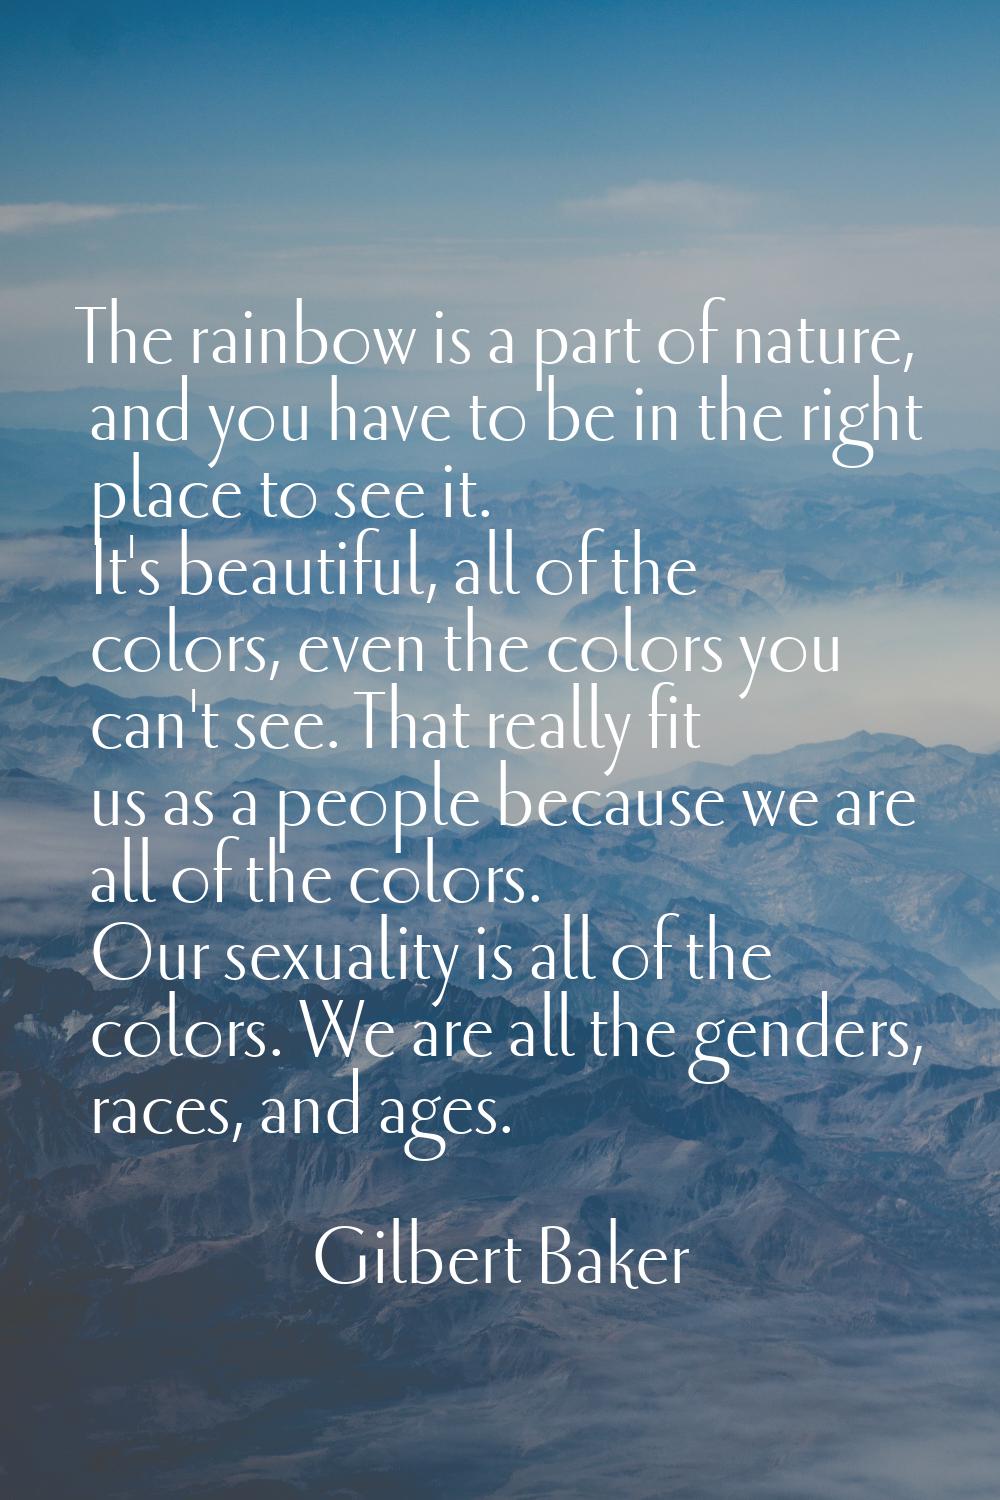 The rainbow is a part of nature, and you have to be in the right place to see it. It's beautiful, a